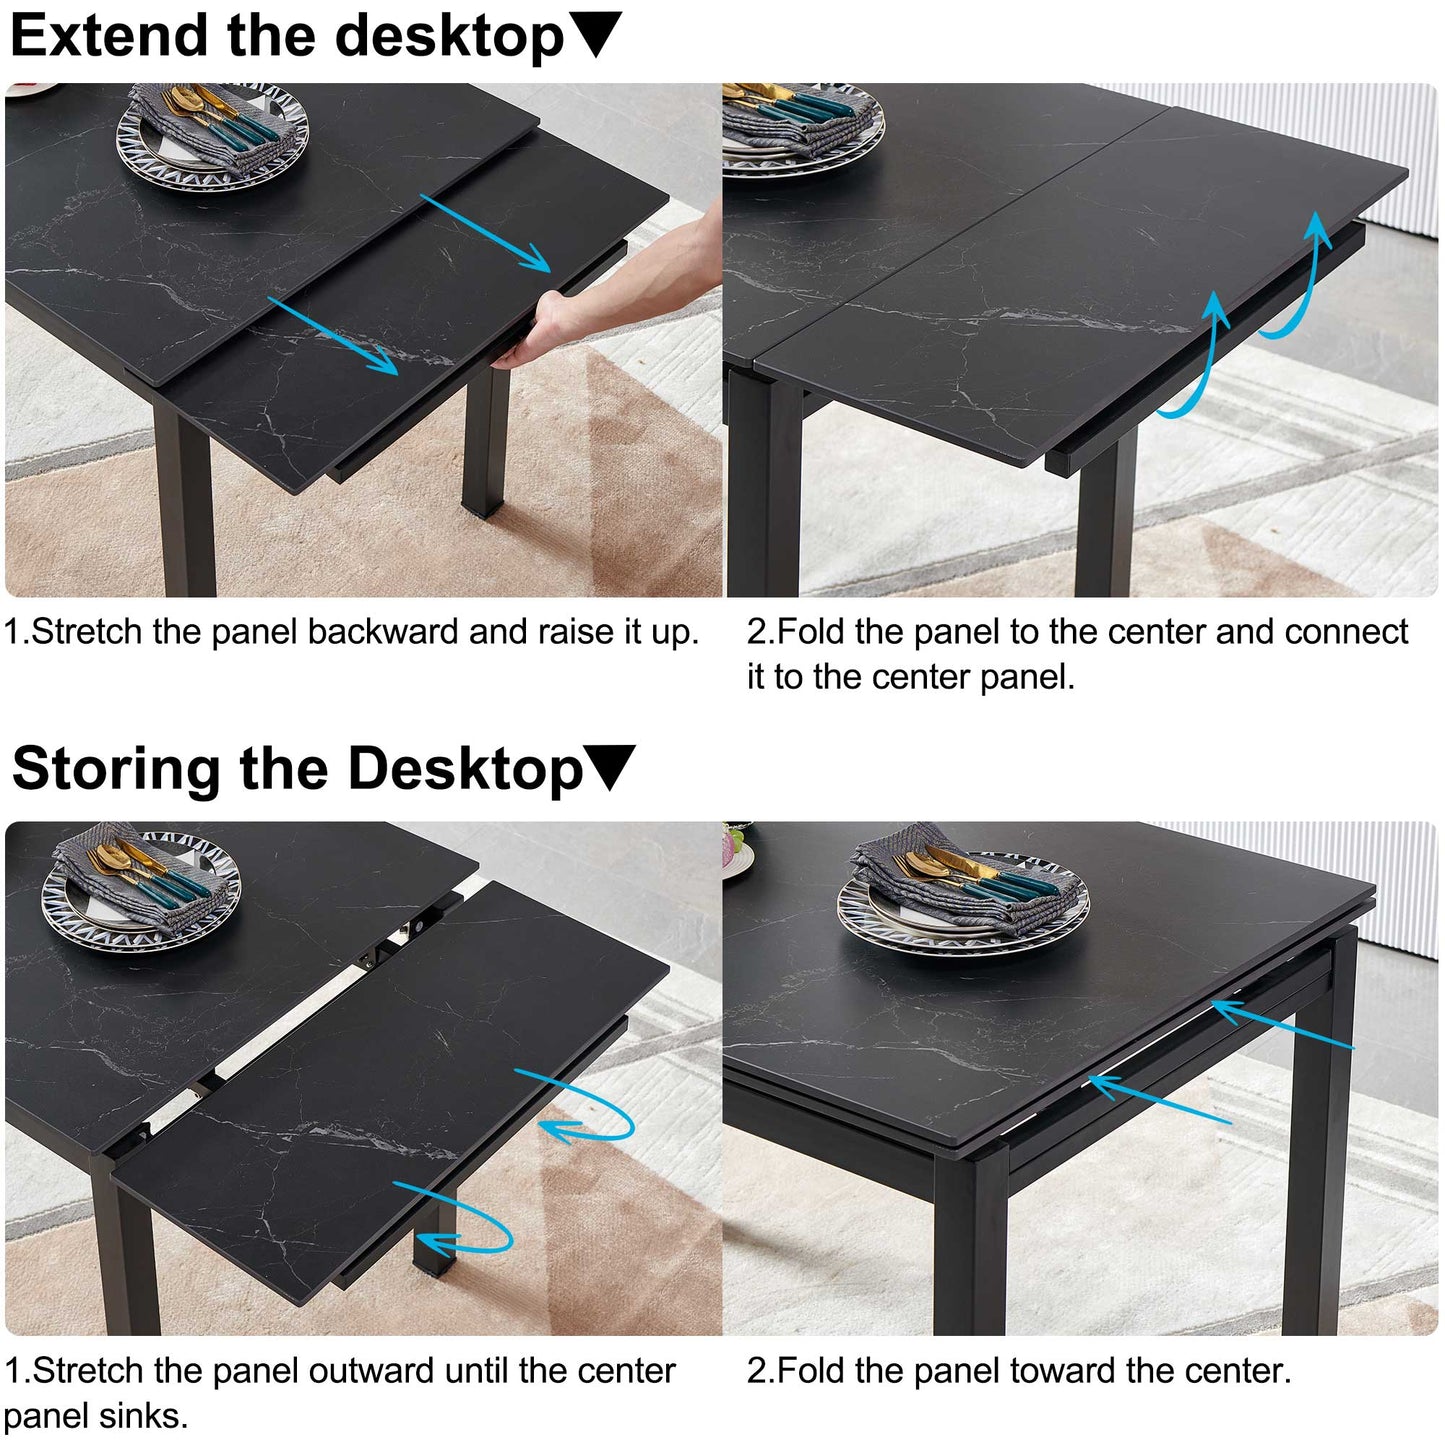 Black Ceramic Modern Rectangular Expandable Dining Room Table For Space-Saving Kitchen Small Space -Table